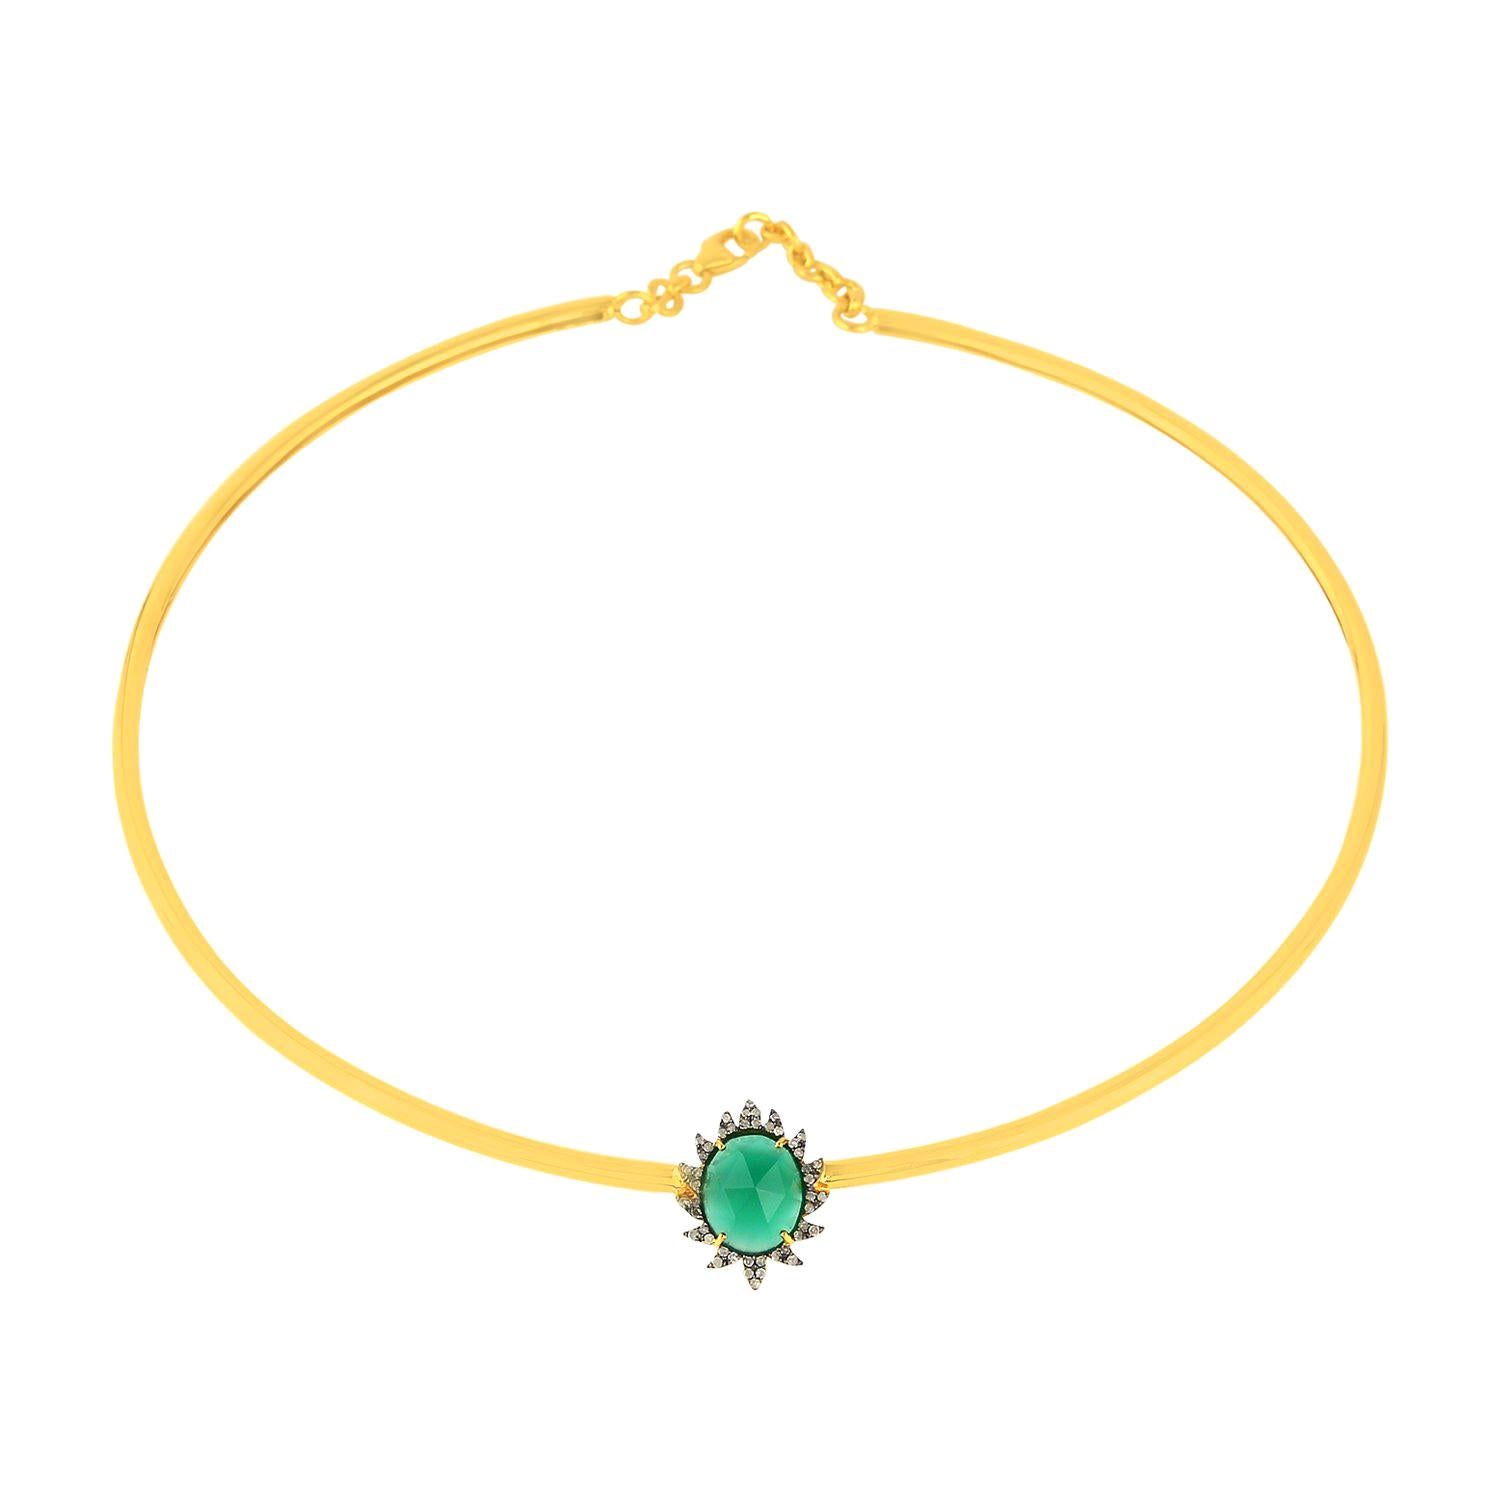  Diamond Green Onyx Meghna Jewels Claw Choker Necklace For Sale